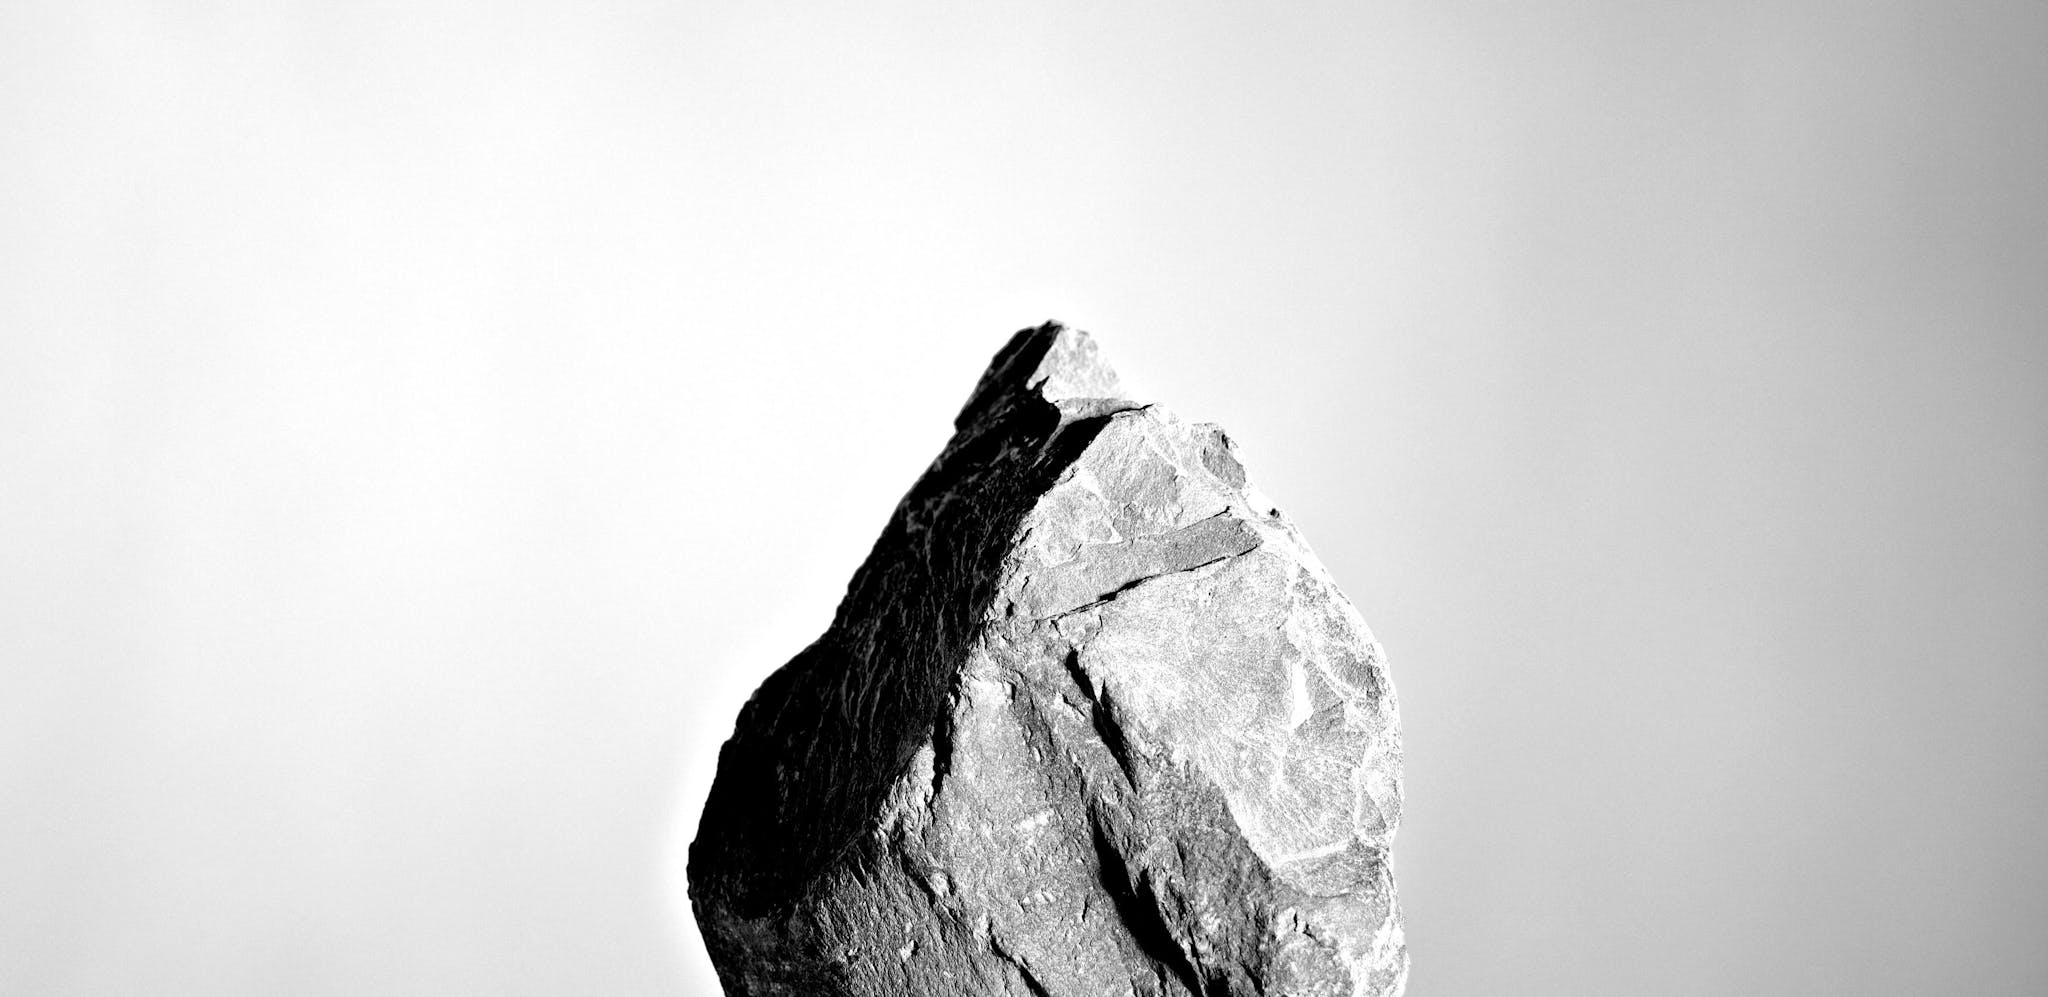 Black and white close up of a stone standing on it's thinnest point on a table, with a reflection in the table's surface